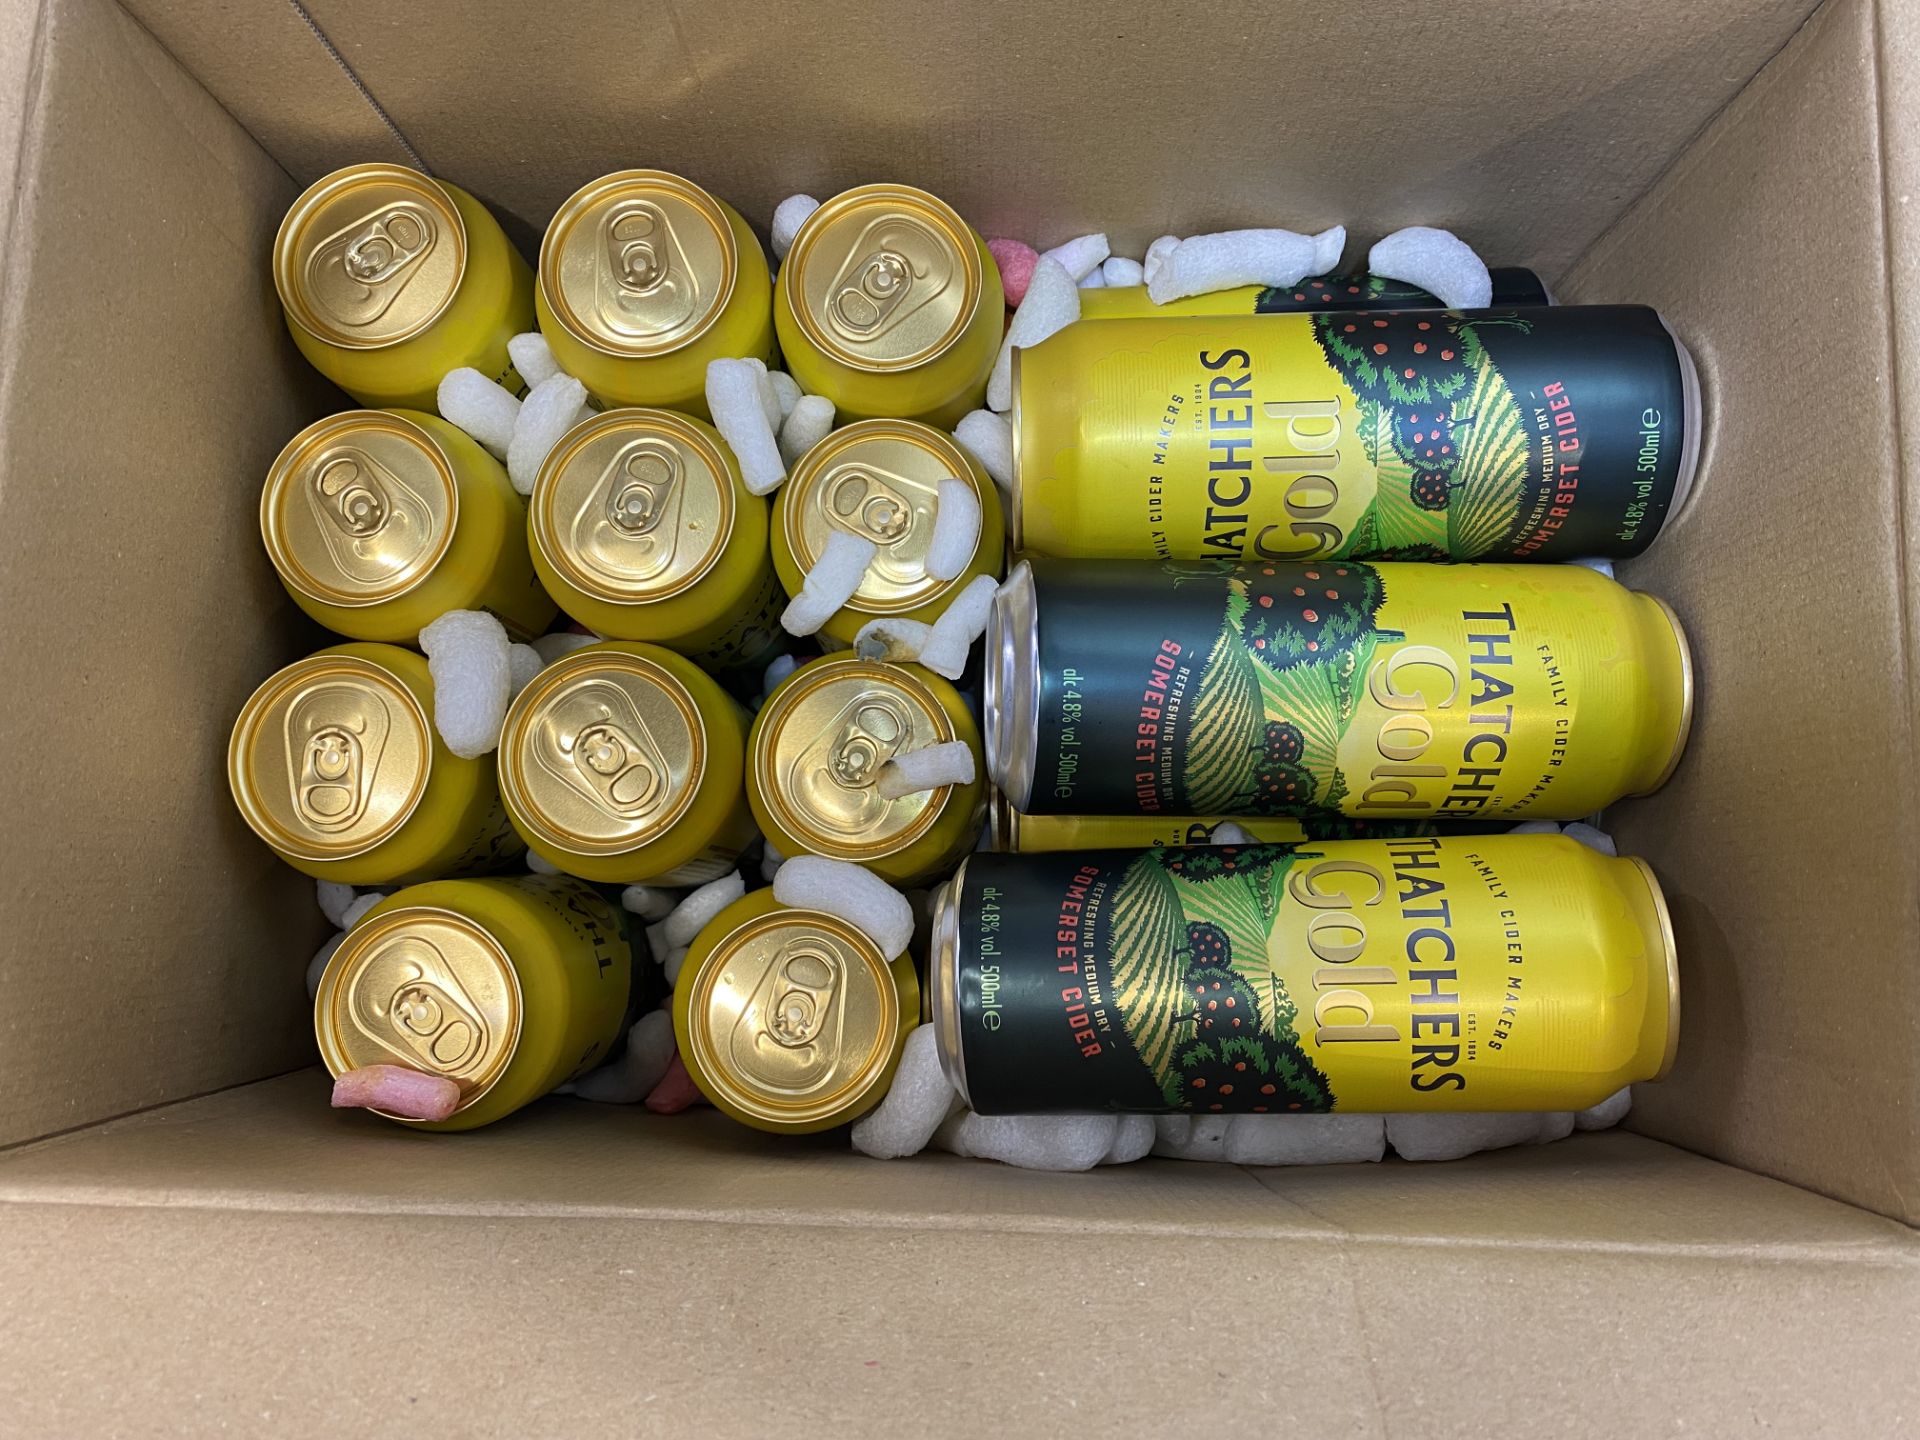 22 x Cans Of Thatcher's Gold Somerset Cider, 500ml, 4.8% Vol - Image 2 of 2